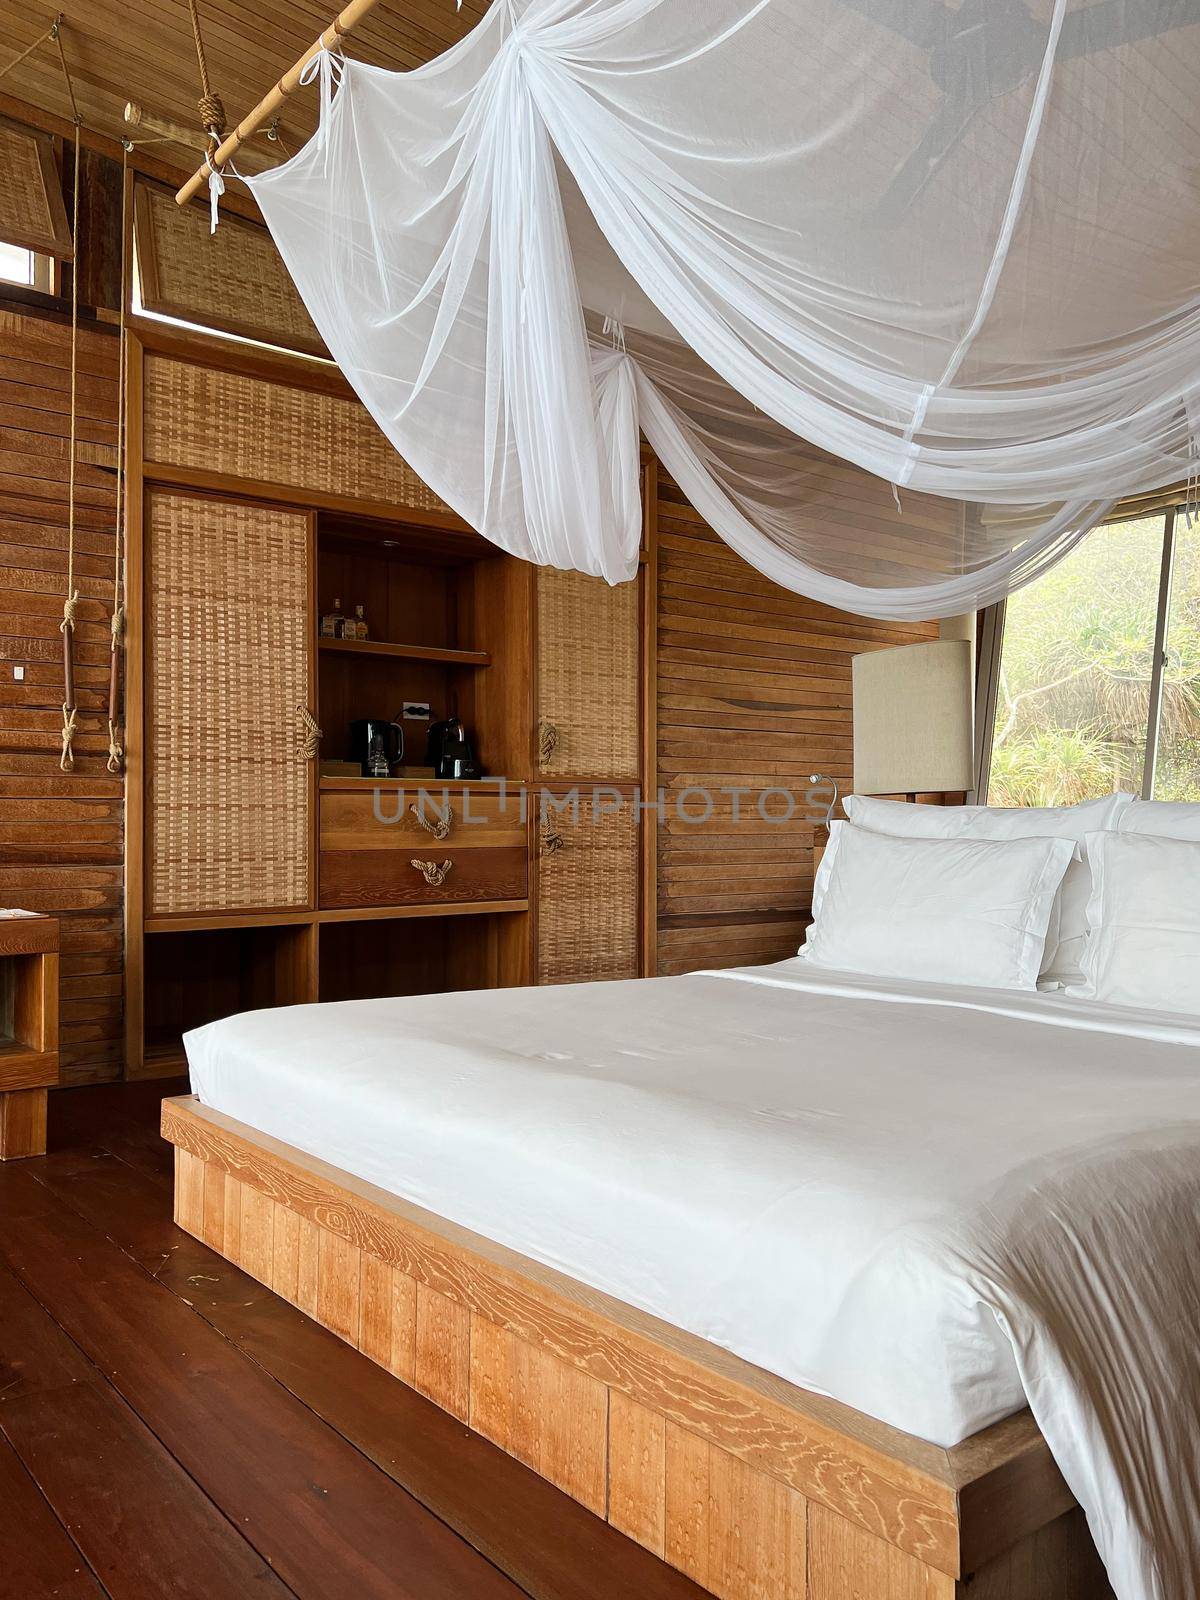 interior wooden tropical resort with bed, bedding and lighting decor on hill in tropical rainforest